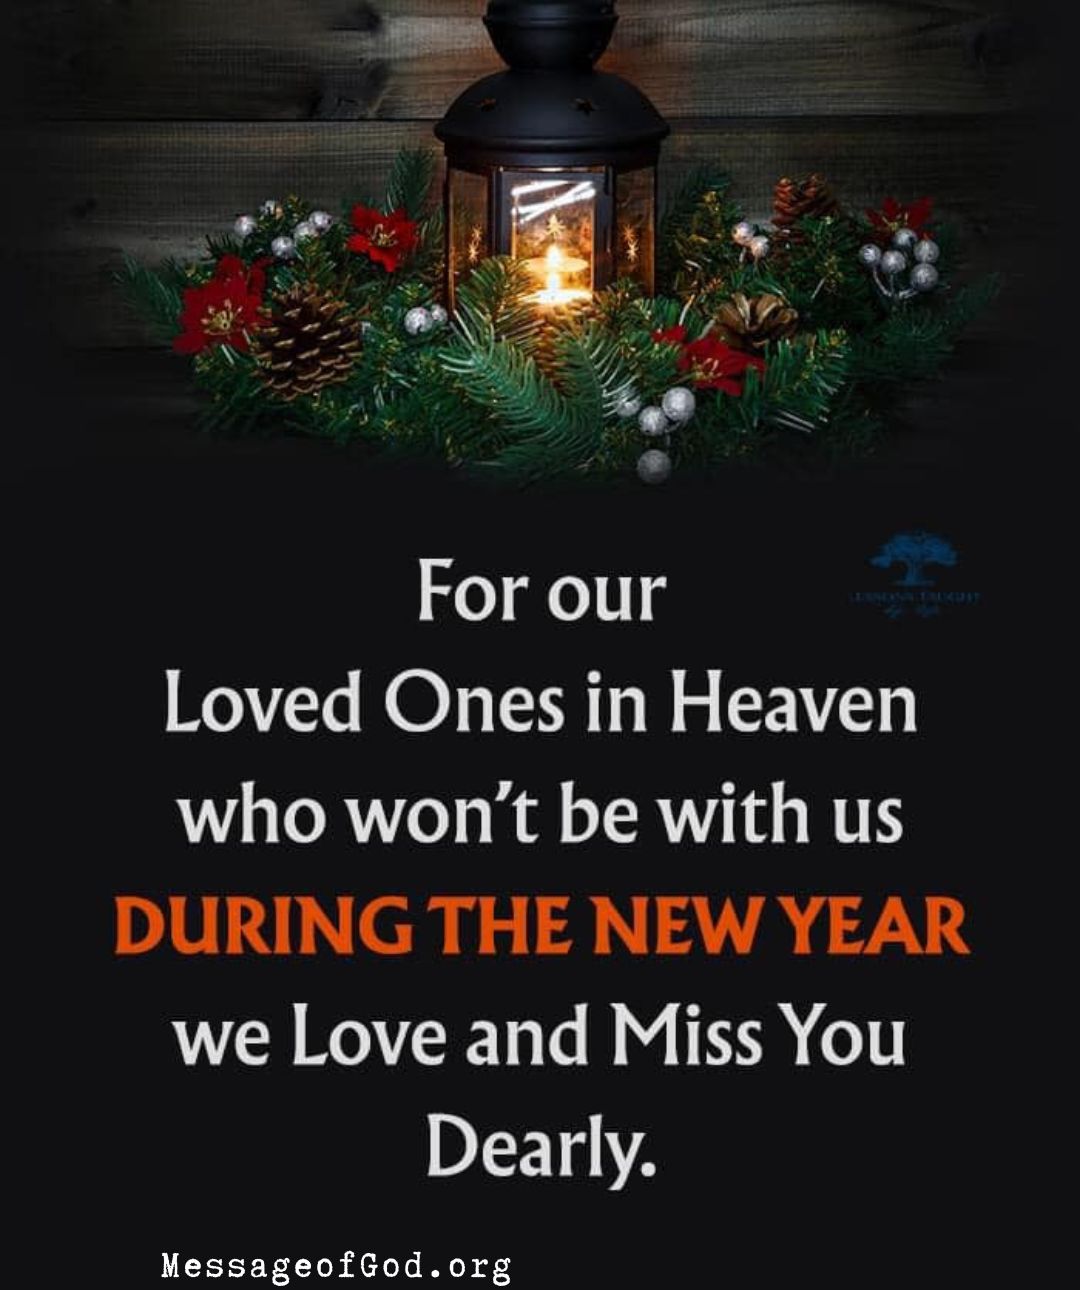 Remembering Our Loved Ones in Heaven During the New Year